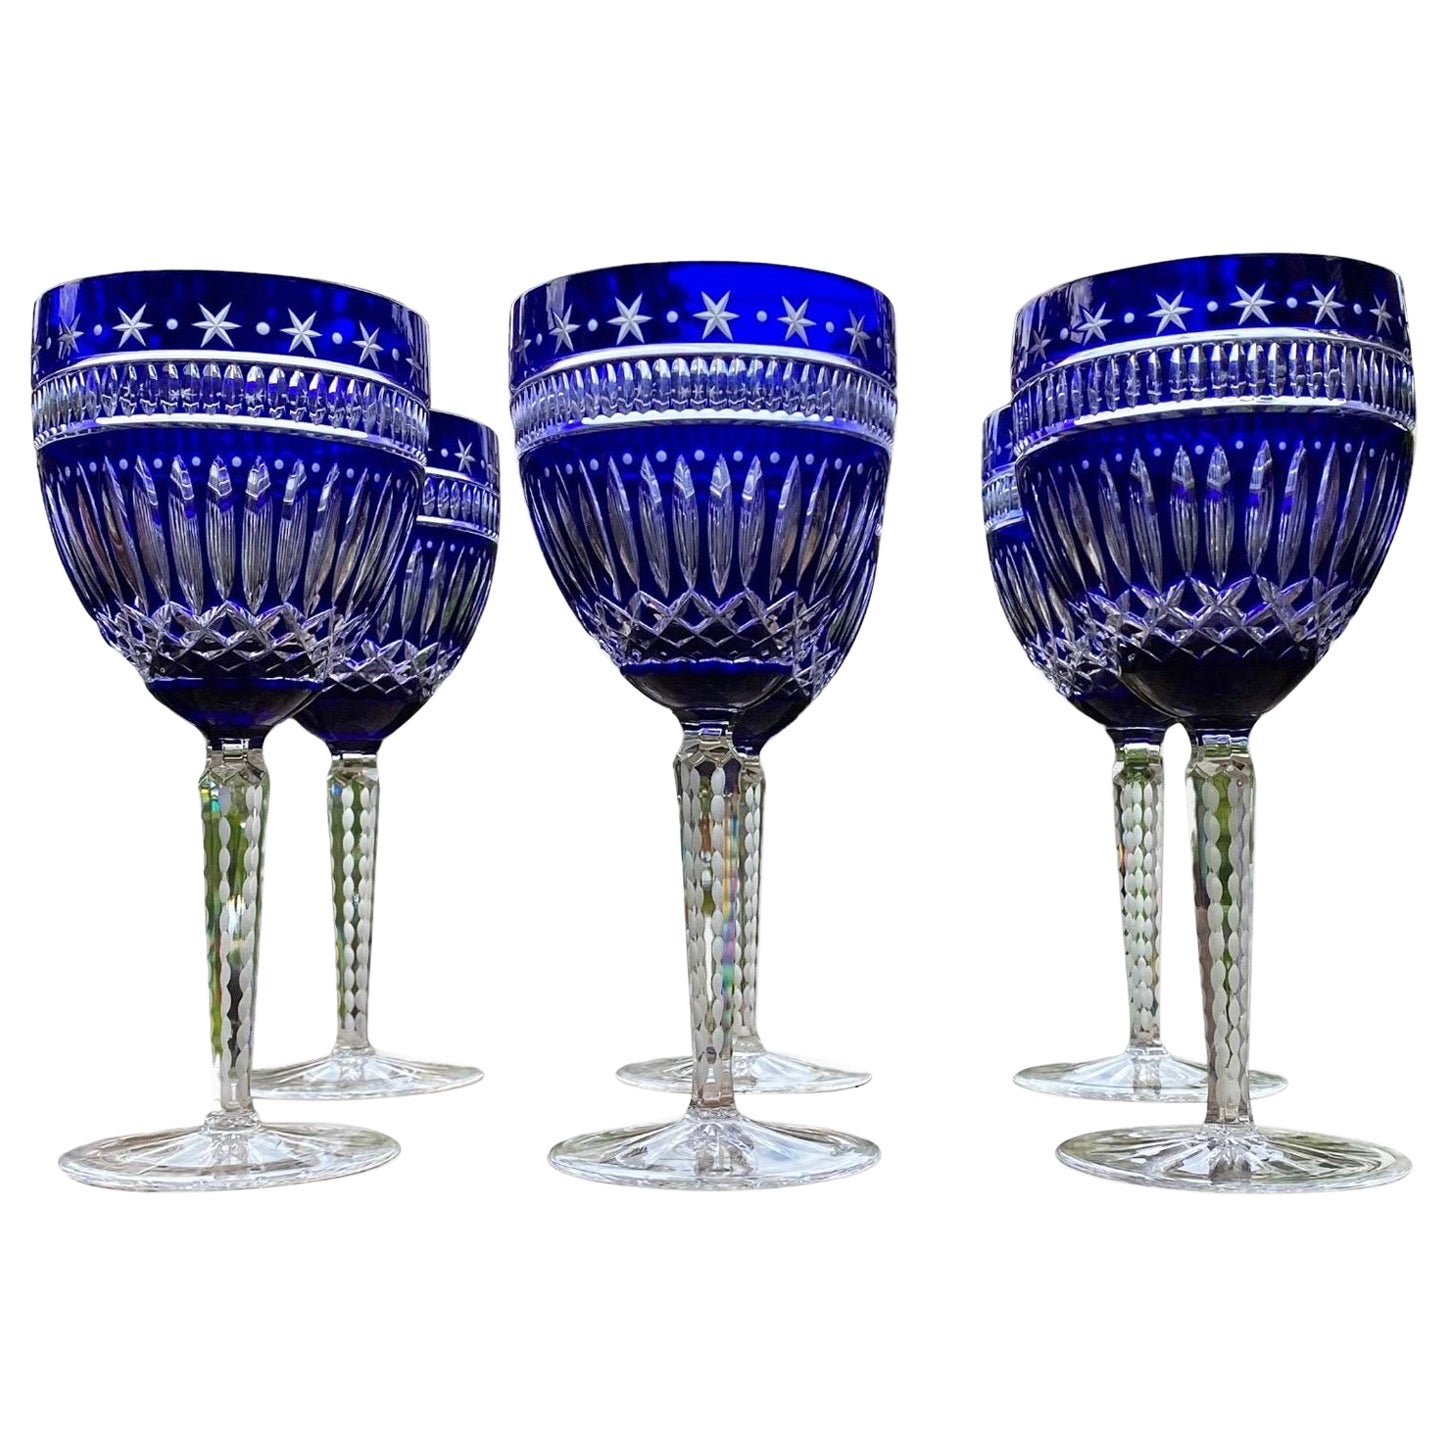 Six Ajka Serenity Star Cobalt Blue Cut To Clear Water Goblets Wine Glasses For Sale